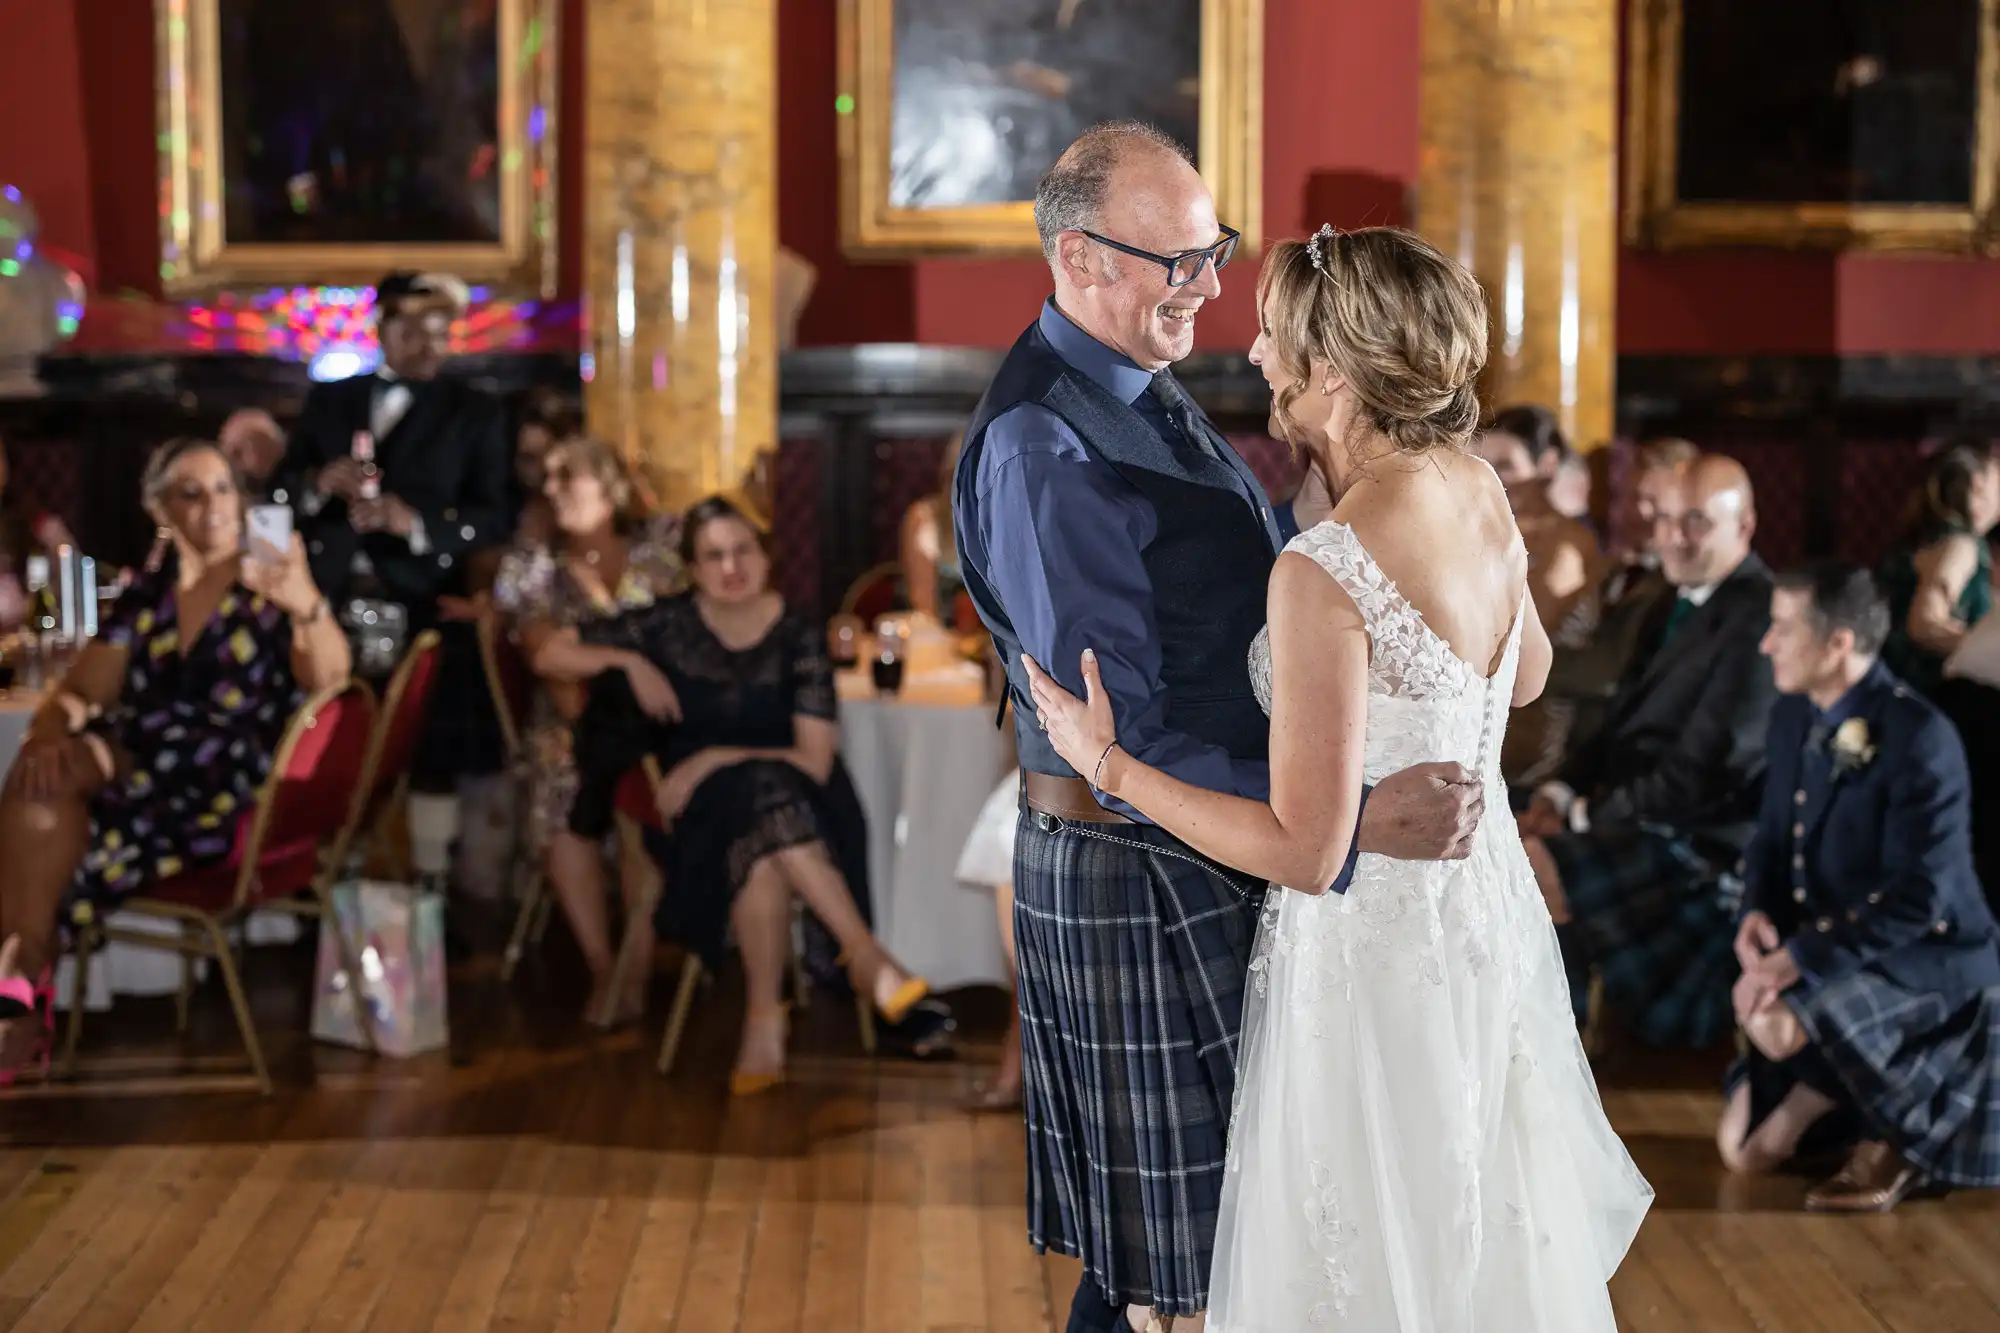 A couple dances while guests sit and watch in a warmly lit room decorated with framed paintings and dark wood panels. The woman wears a white dress, and the man wears a kilt and dark shirt.